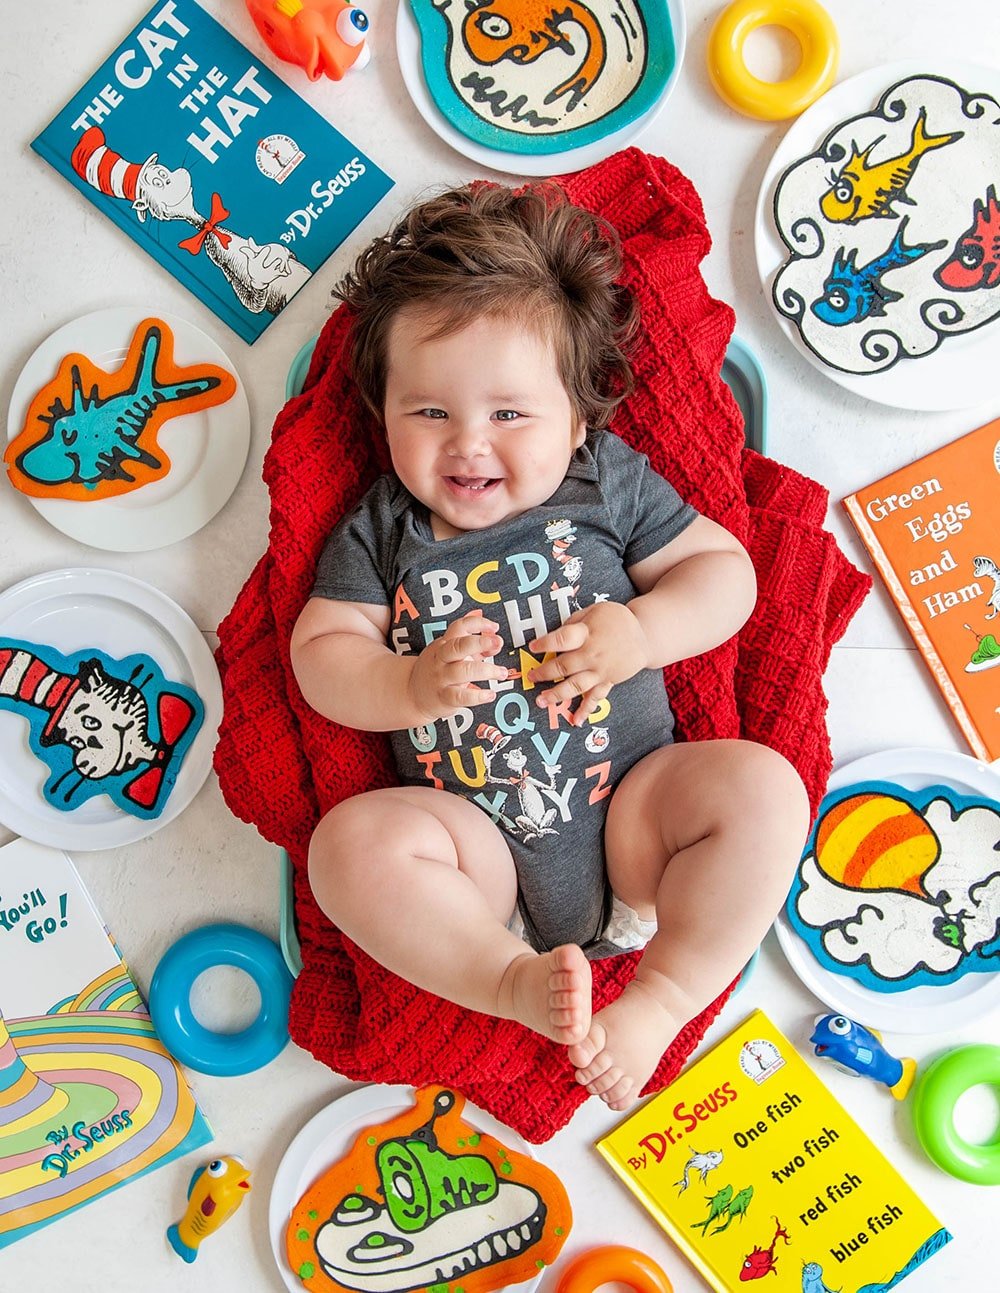 baby boy on red blanket with pancake art and dr seuss books surrounding him